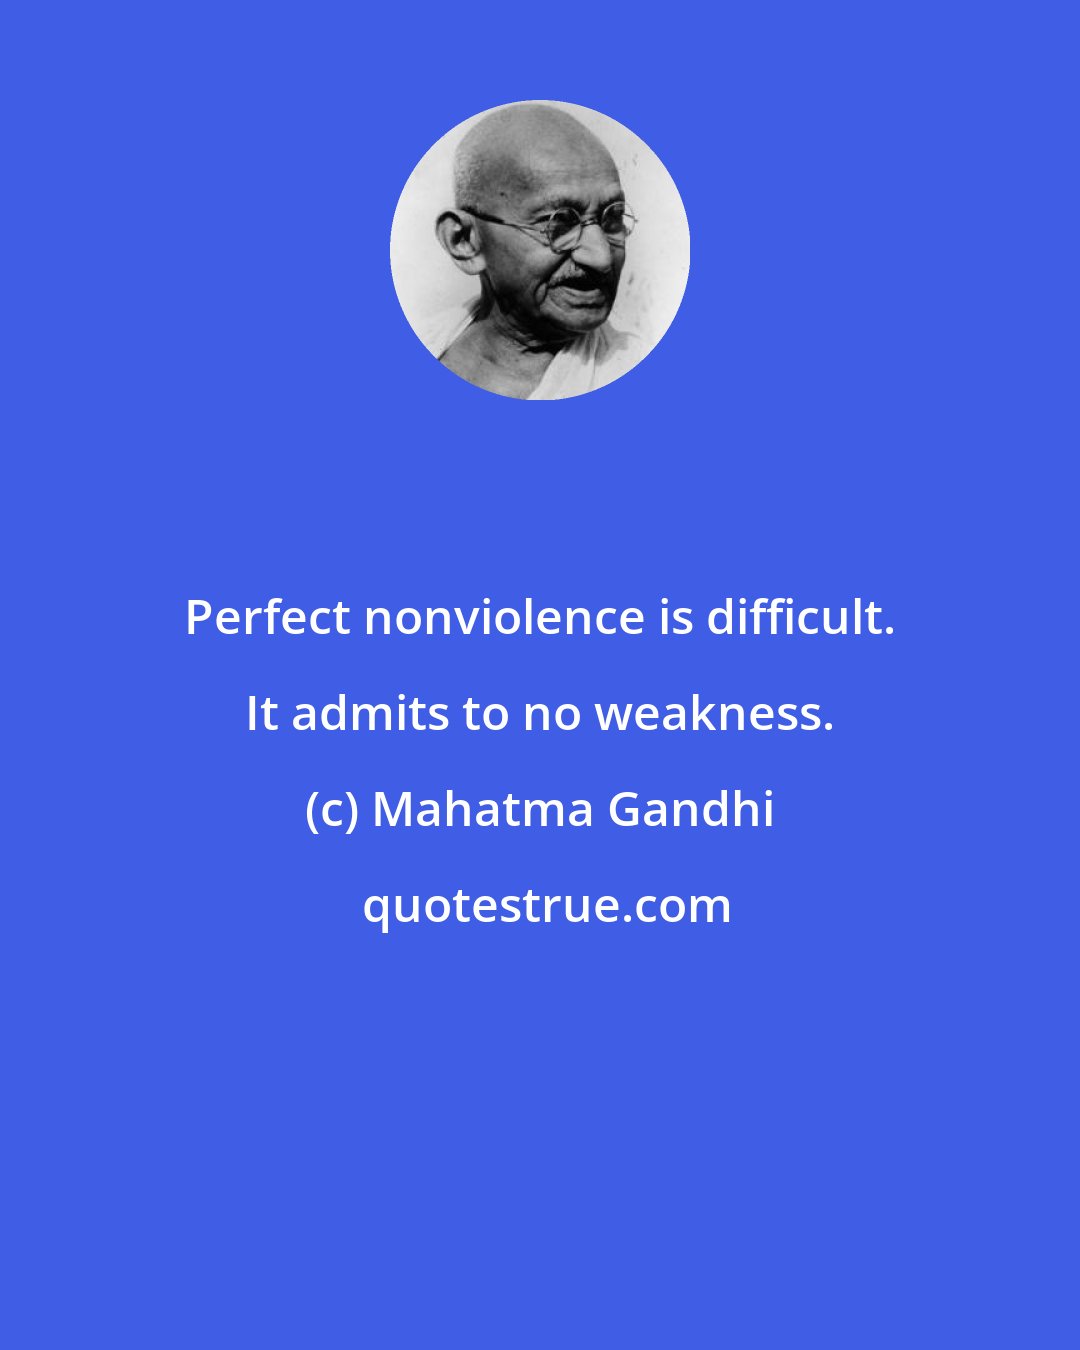 Mahatma Gandhi: Perfect nonviolence is difficult. It admits to no weakness.